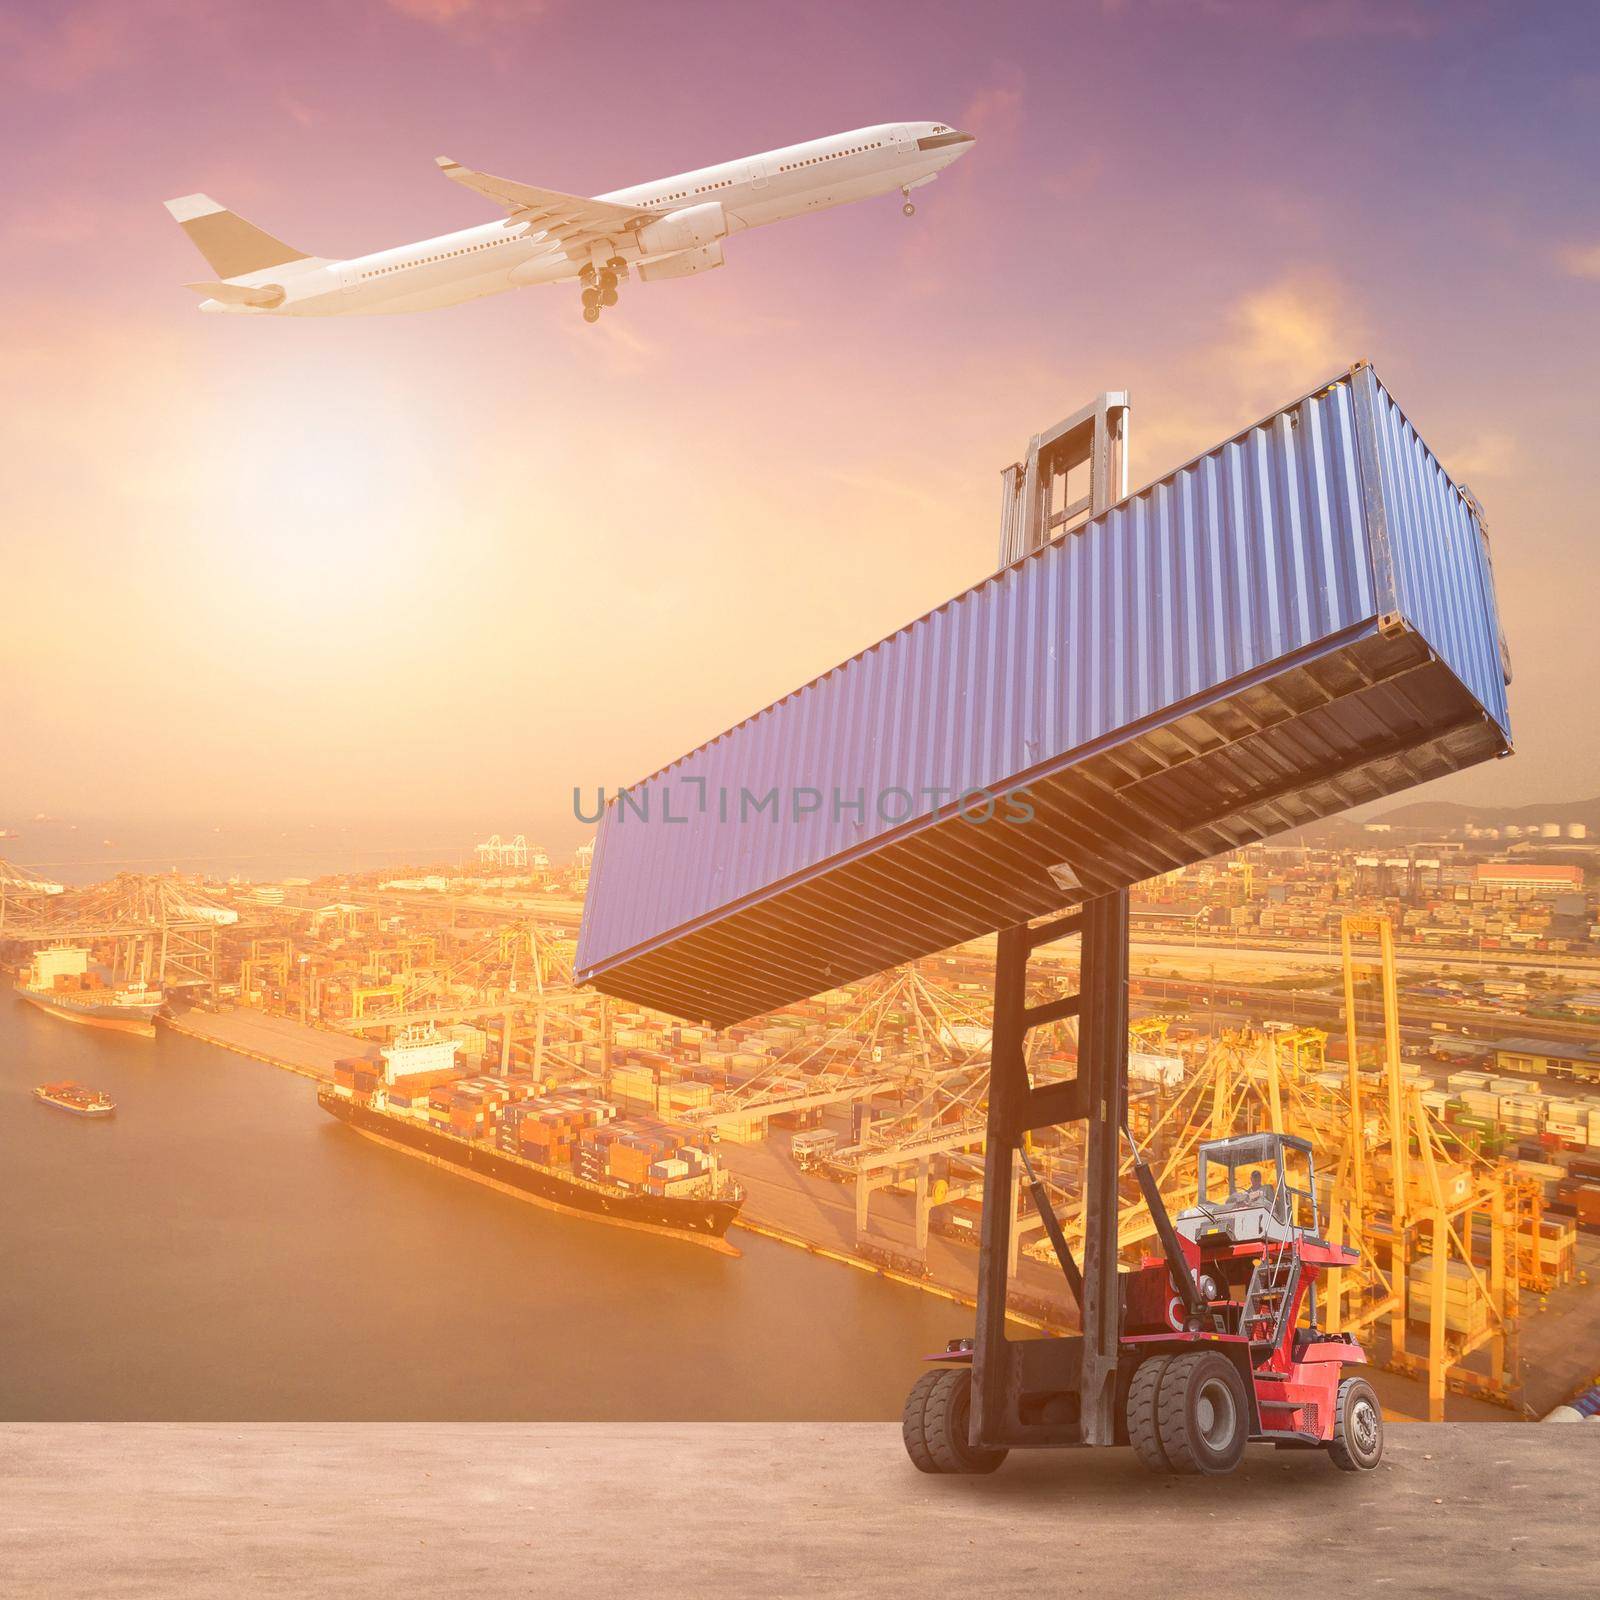 Logistics and transportation of Container Cargo ship, Cargo plane and Forklift truck work in shipping yard. Photo concept for global business containers shipping,Logistic,Import and Export industry. by Nuamfolio